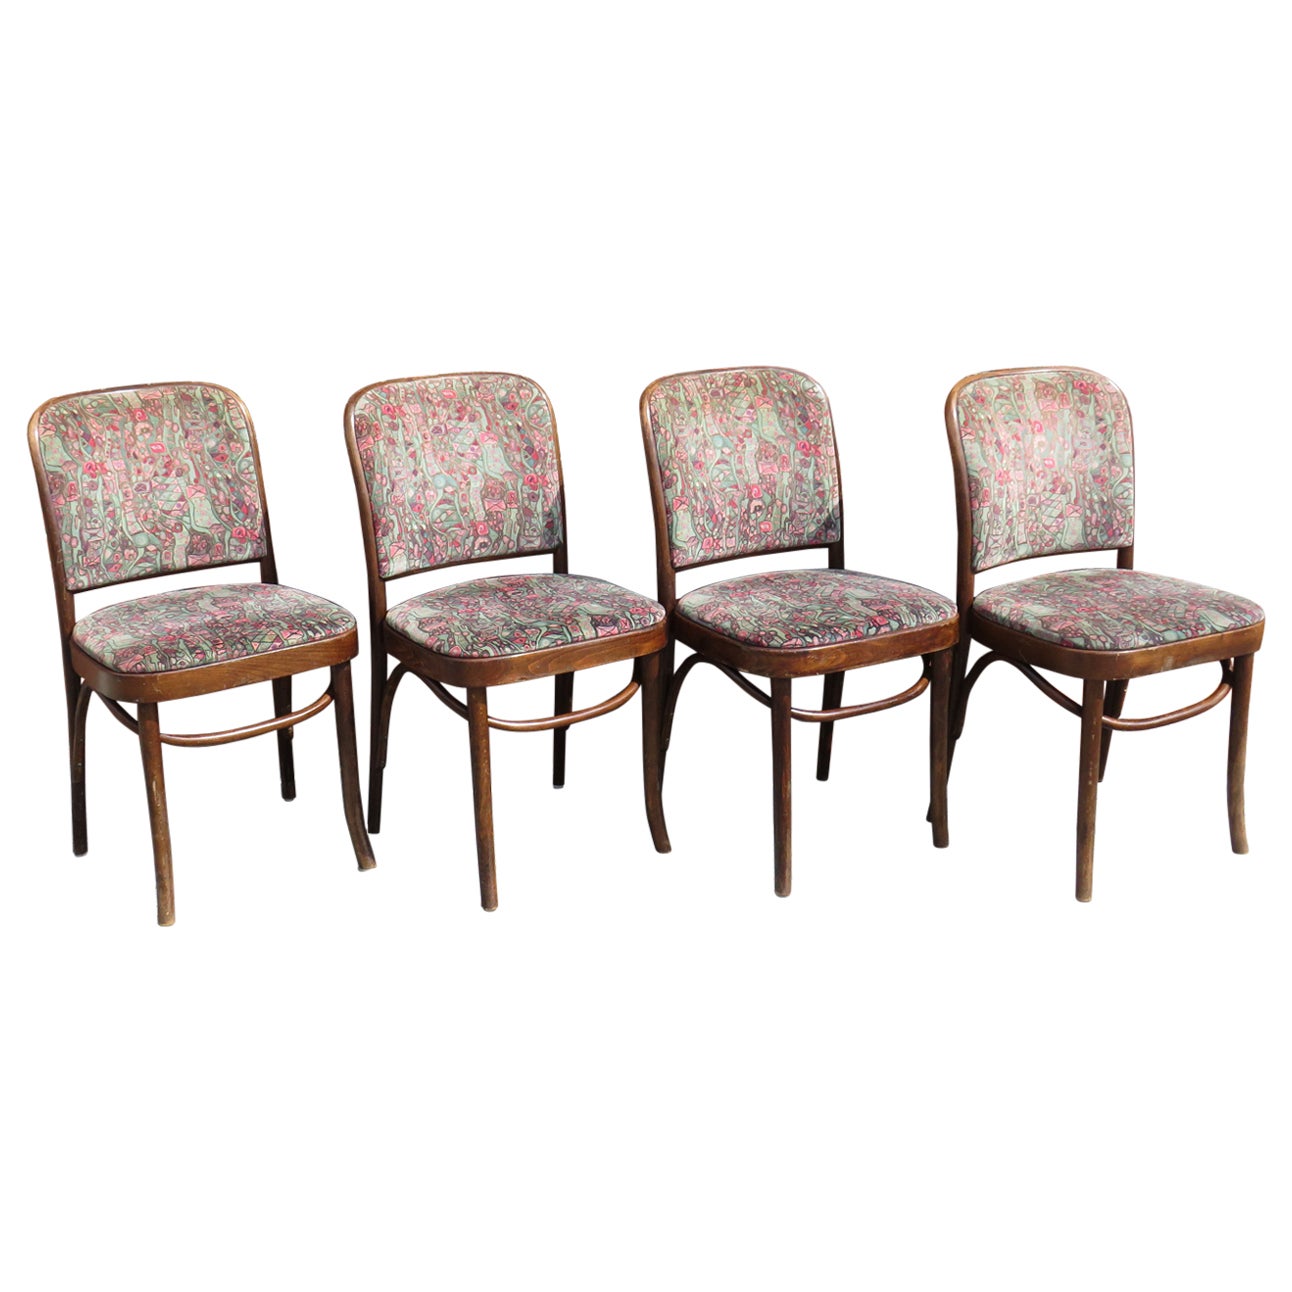 4 Thonet Chairs, Model Prague No. 811, First Half of the 20th Century For Sale